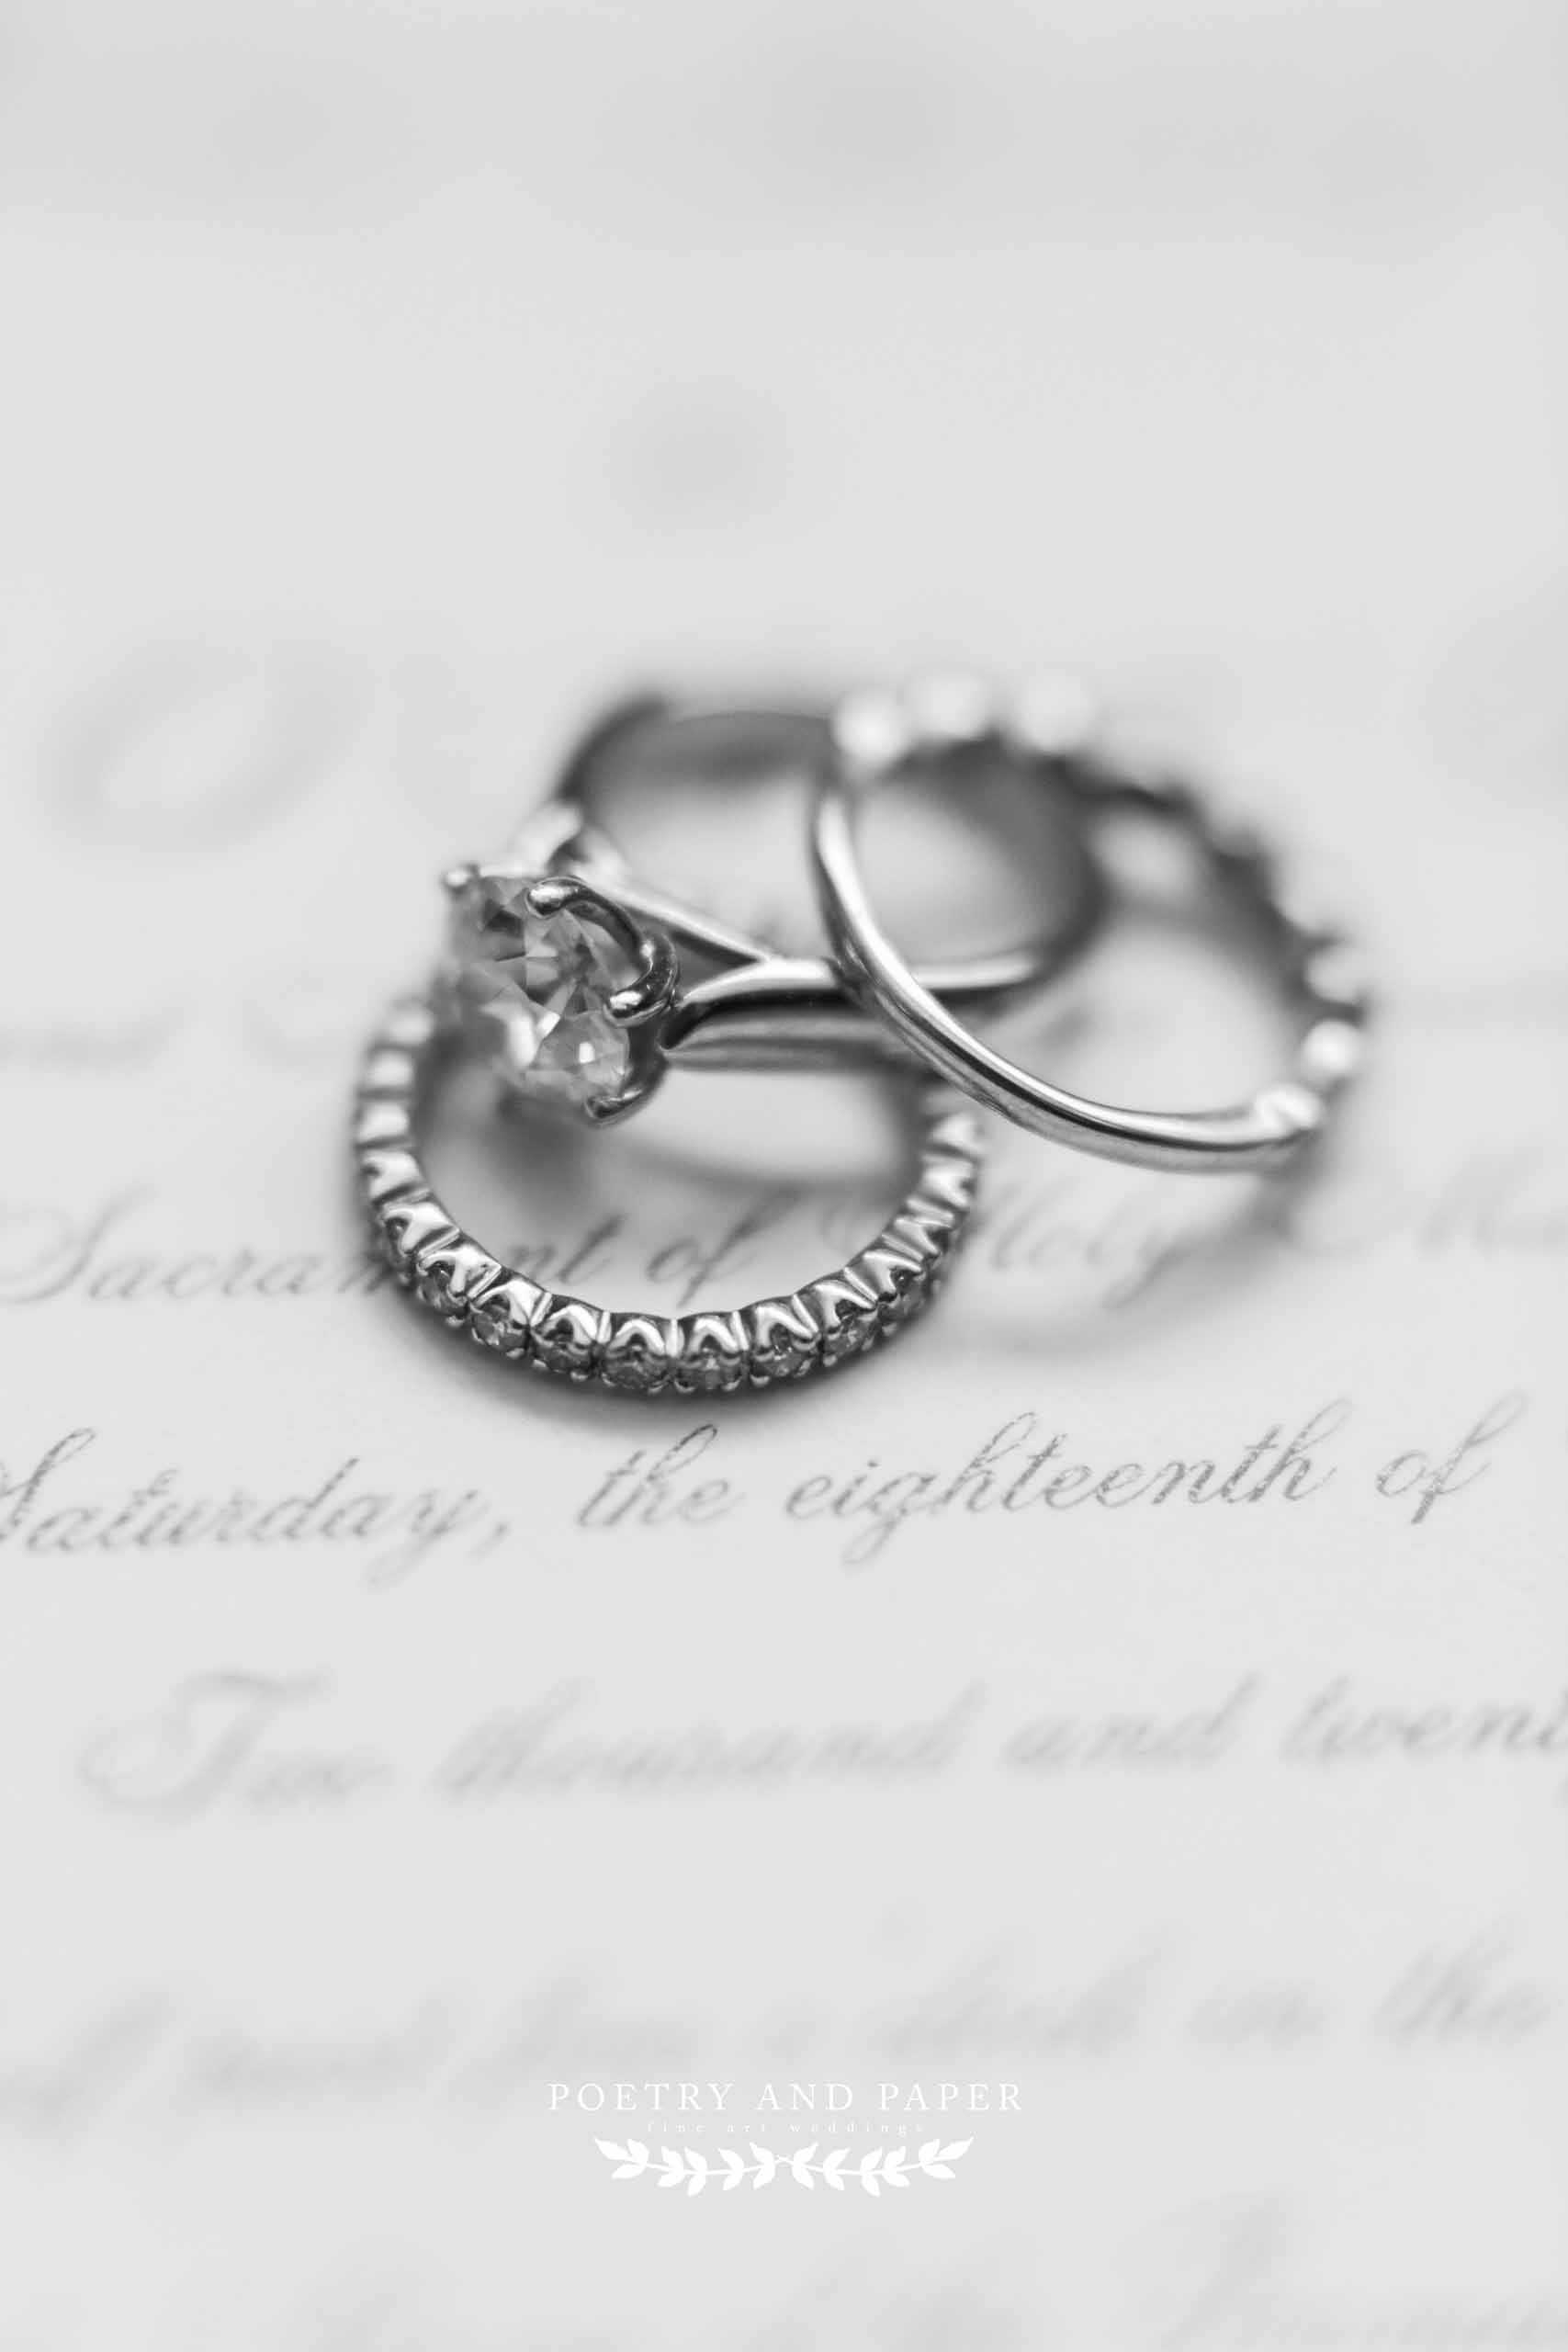 Top Destination Wedding Photographer- Timeless- Poetry and Paper- Dawn Johnson- black and white wedding rings.jpg